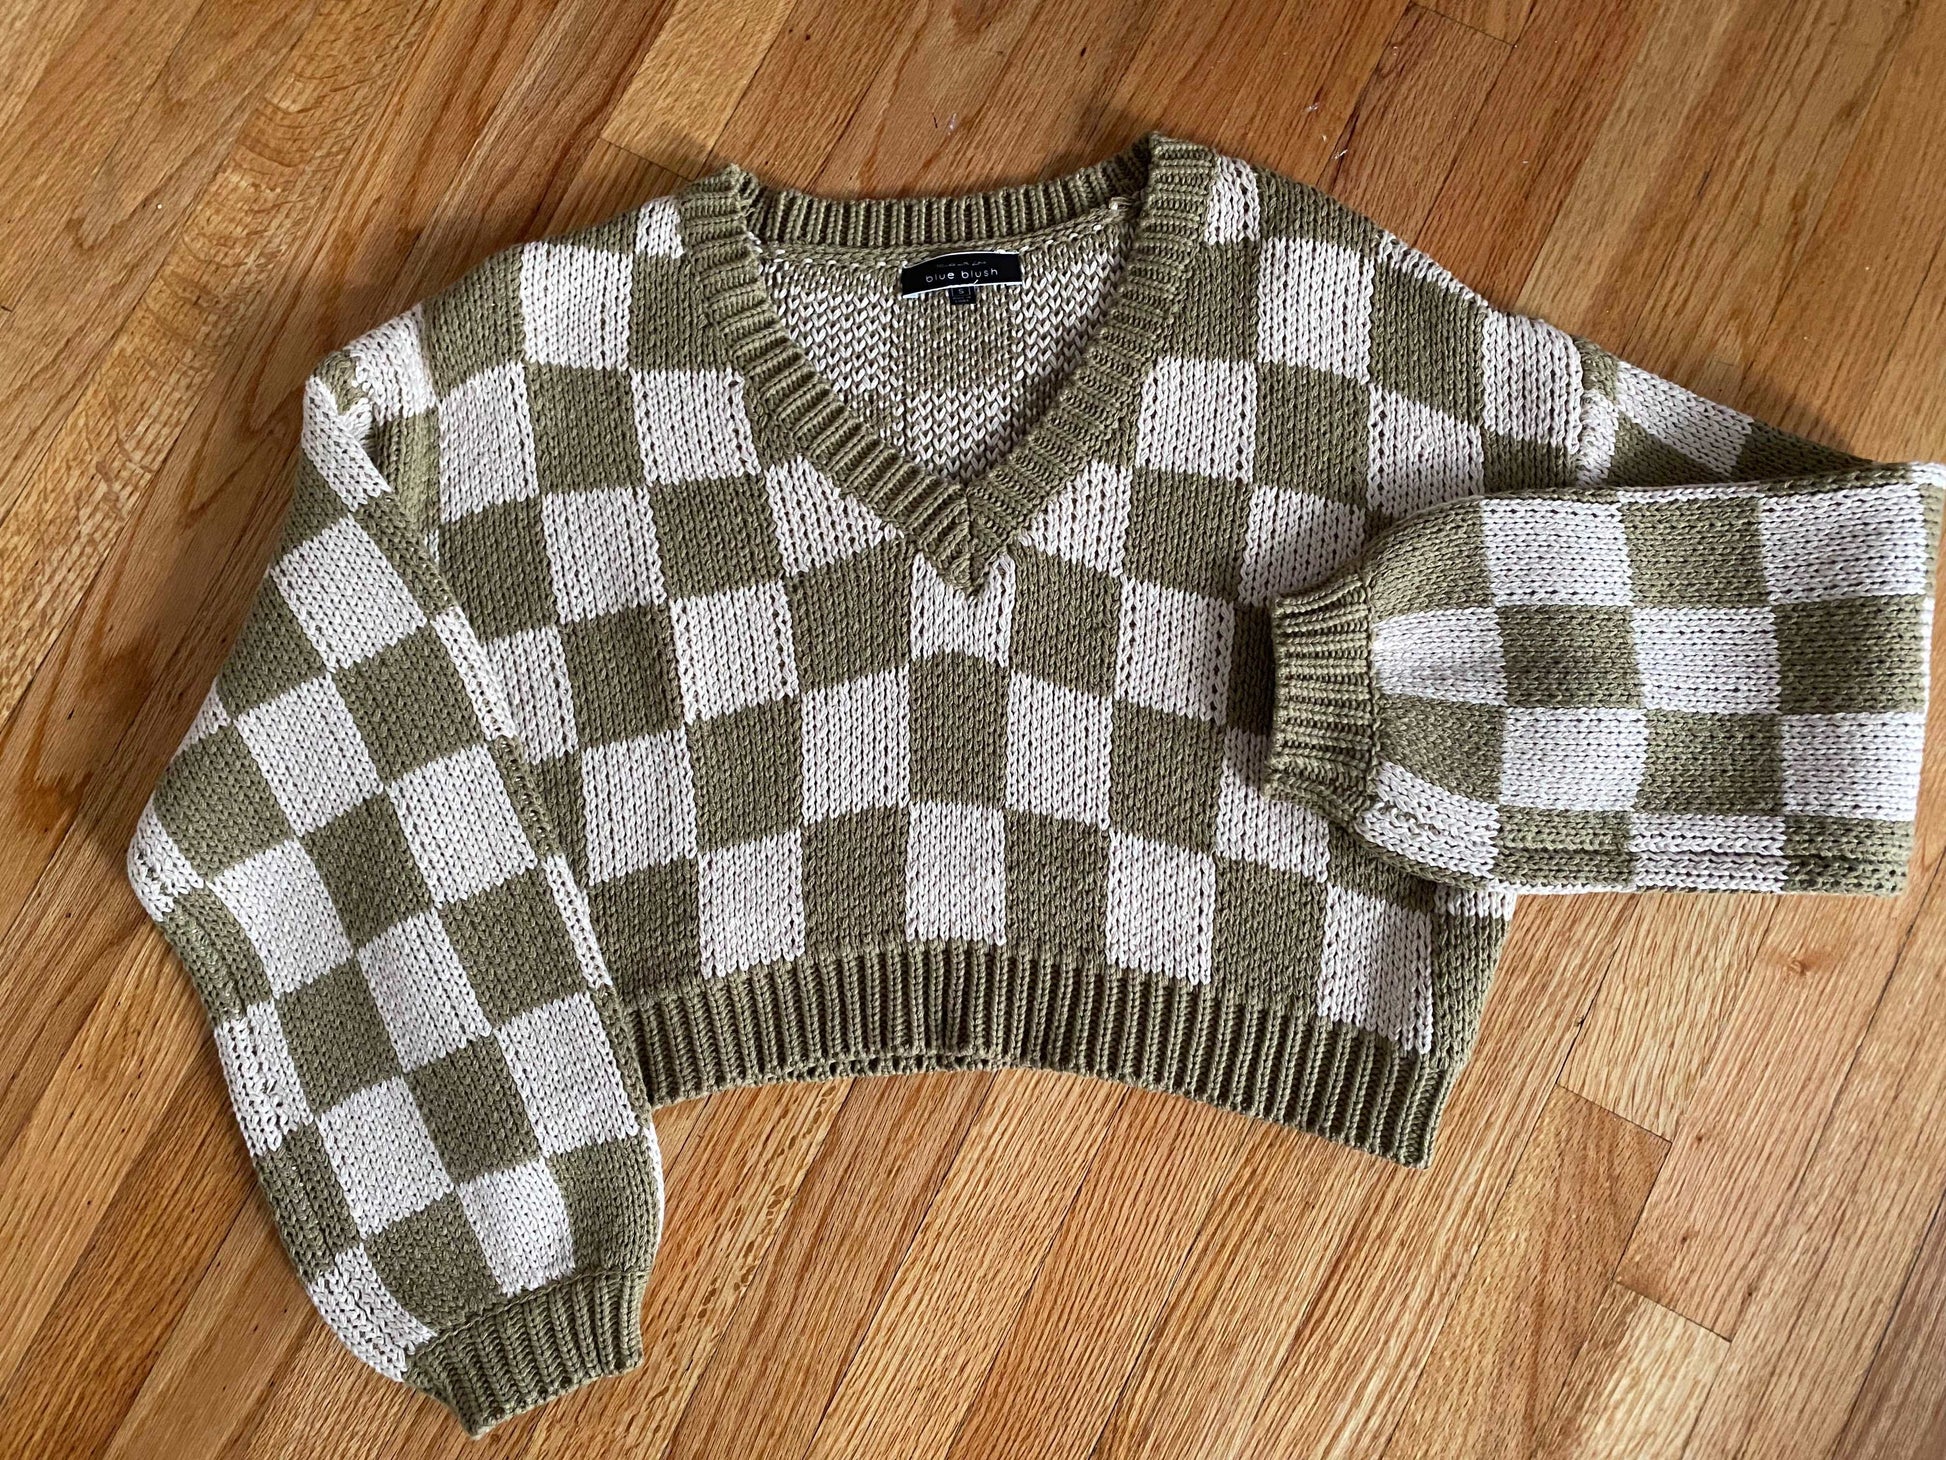 Checkmate Sweater